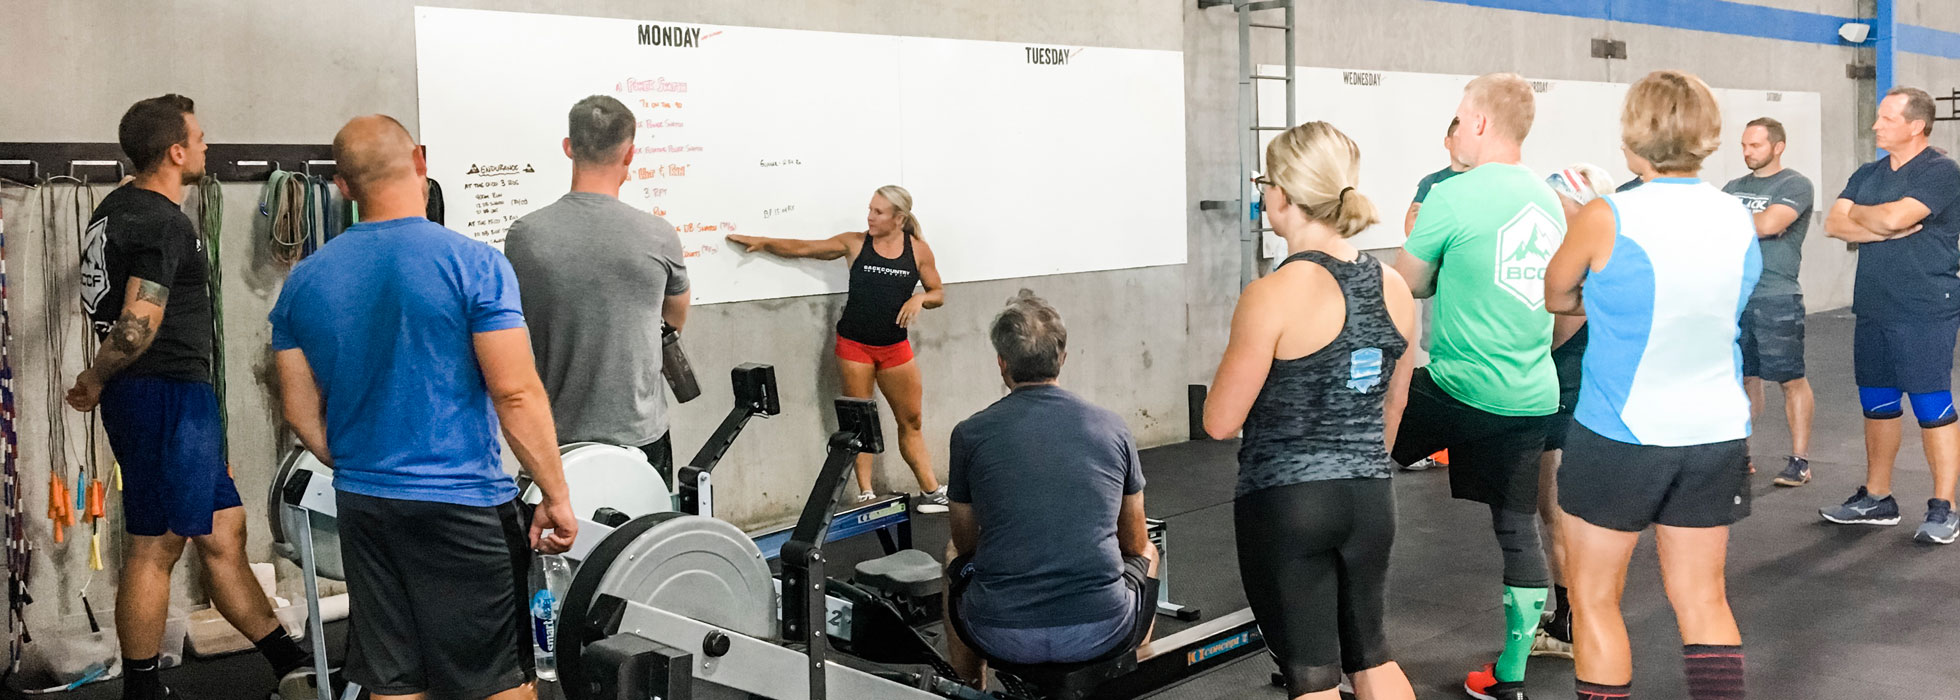 CrossFit Classes near Highlands Ranch CO, CrossFit Classes near Denver CO, CrossFit Classes near Littleton CO